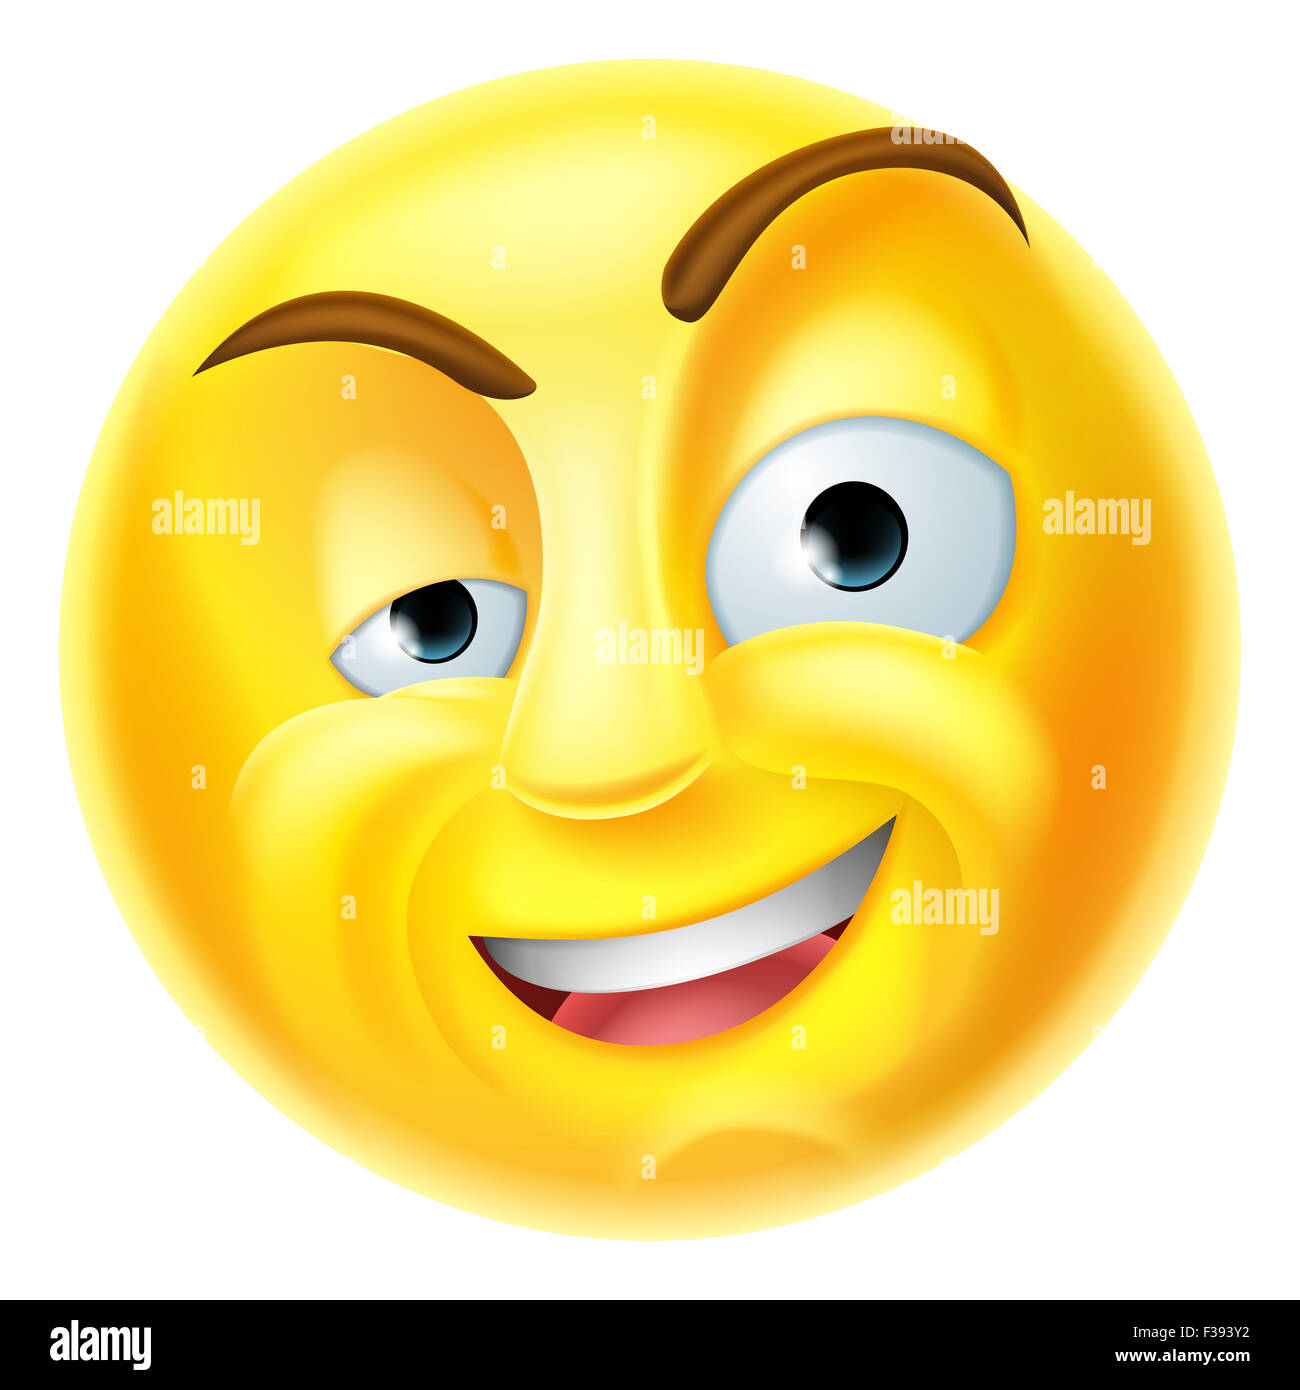 A charming emoji emoticon smiley face character with one eyebrow raised Stock Photo